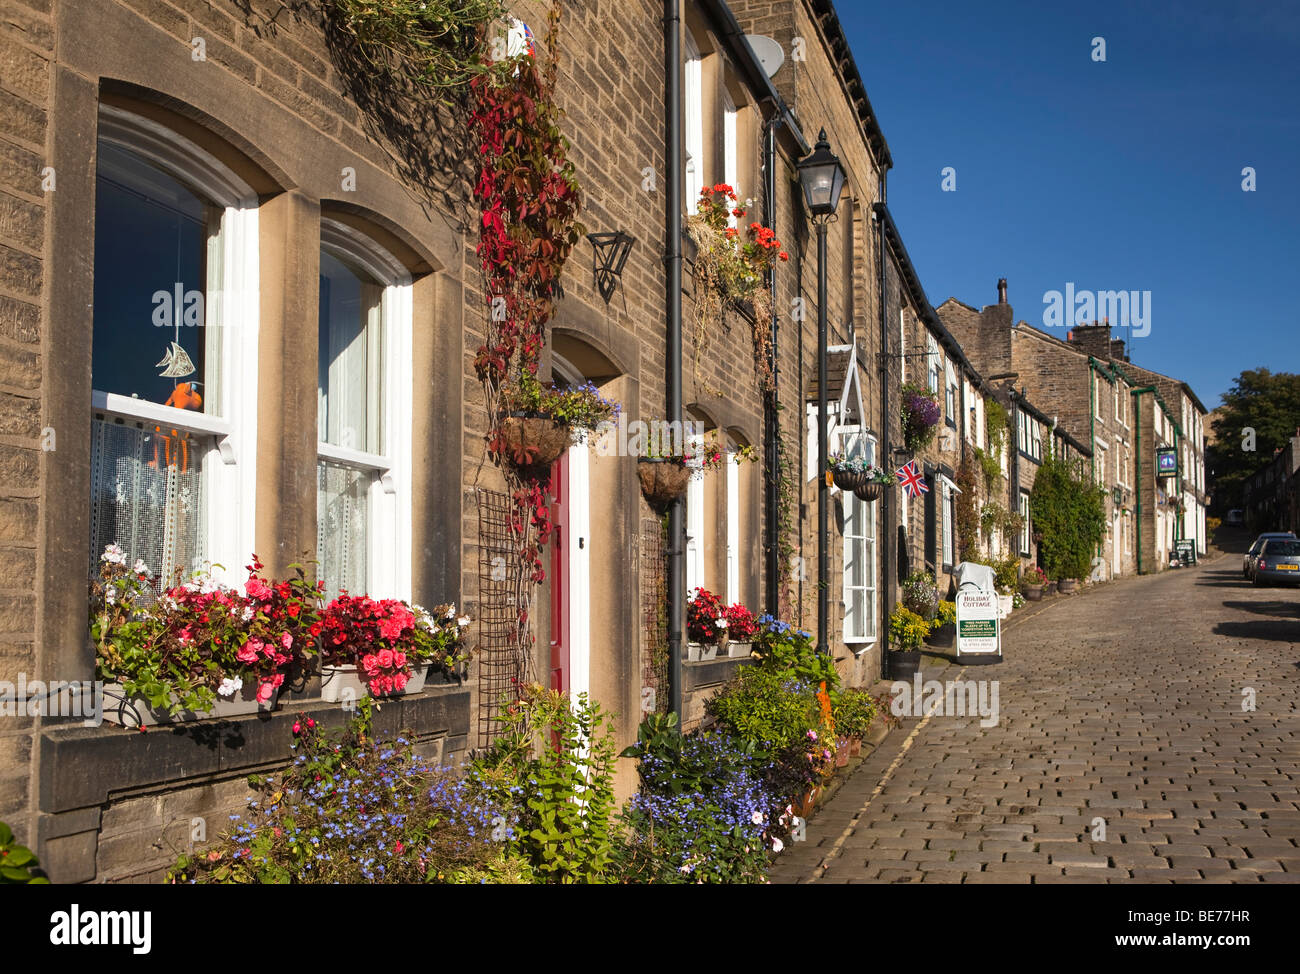 UK, England, Yorkshire, Haworth, Main Street, houses with floral planting outside Stock Photo